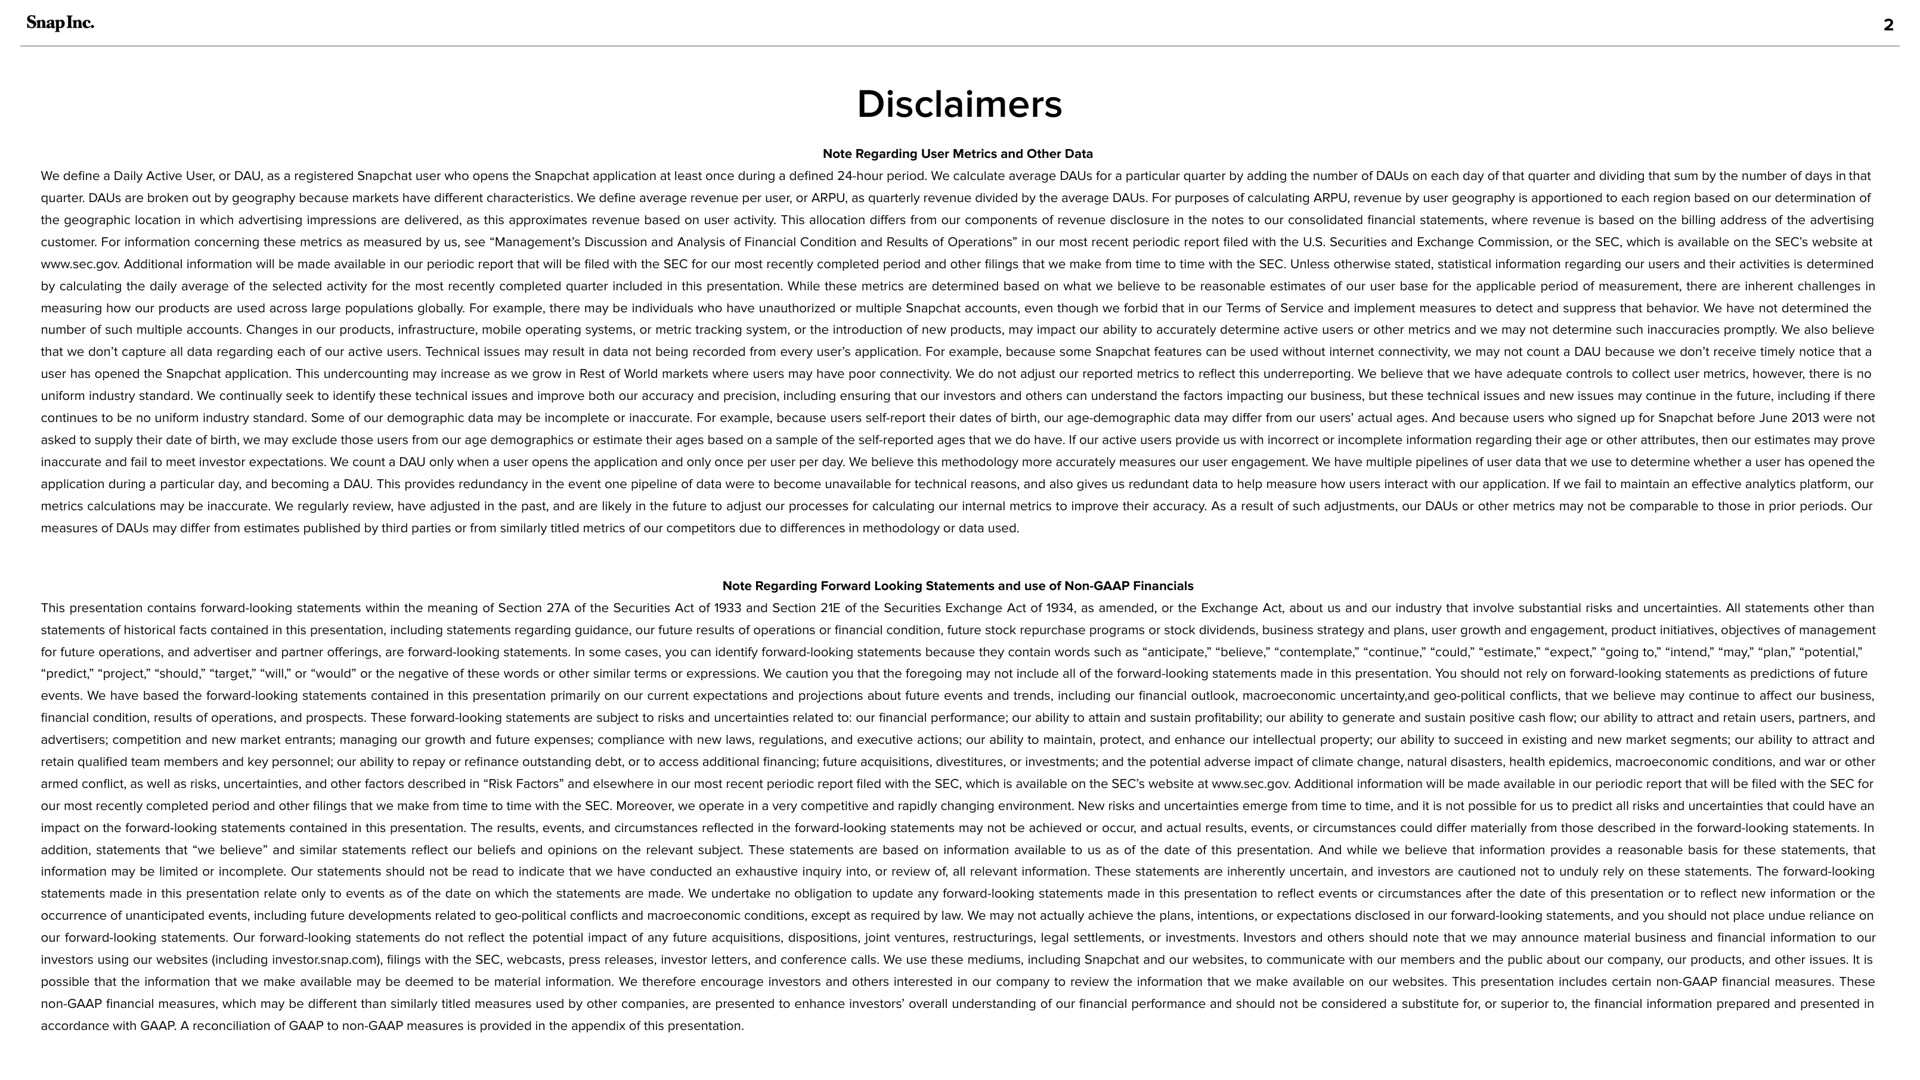 disclaimers | Snap Inc